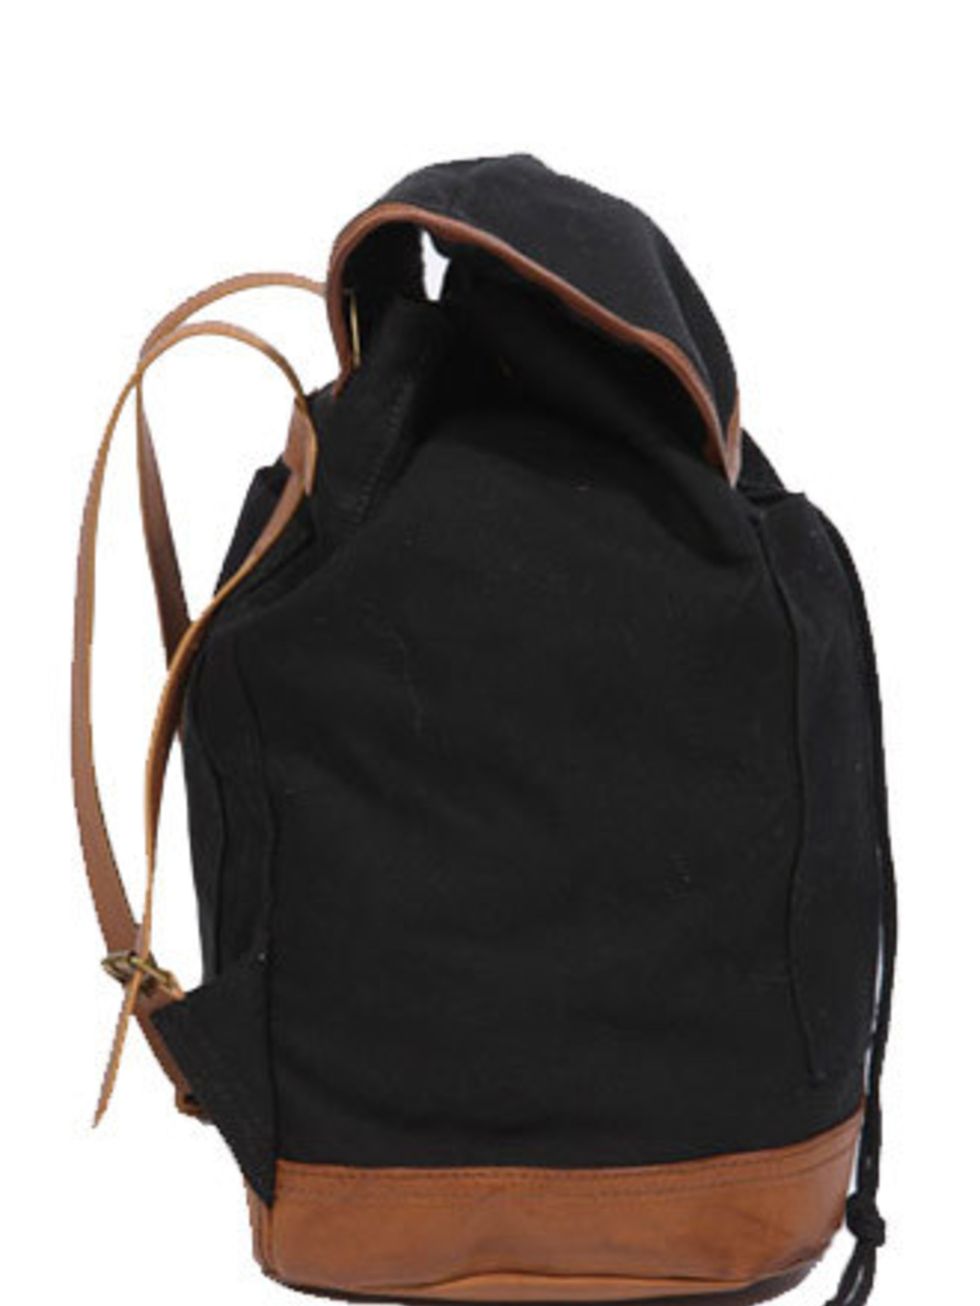 <p>Thanks to Alexander Wang backpacks are officially cool again. Wear this Urban Outfitters bag to the office rather than tourist-style on holiday.</p><p>Backpack, £38 by <a href="http://www.urbanoutfitters.co.uk/Canvas-Trim-Backpack/invt/5771428340361&am